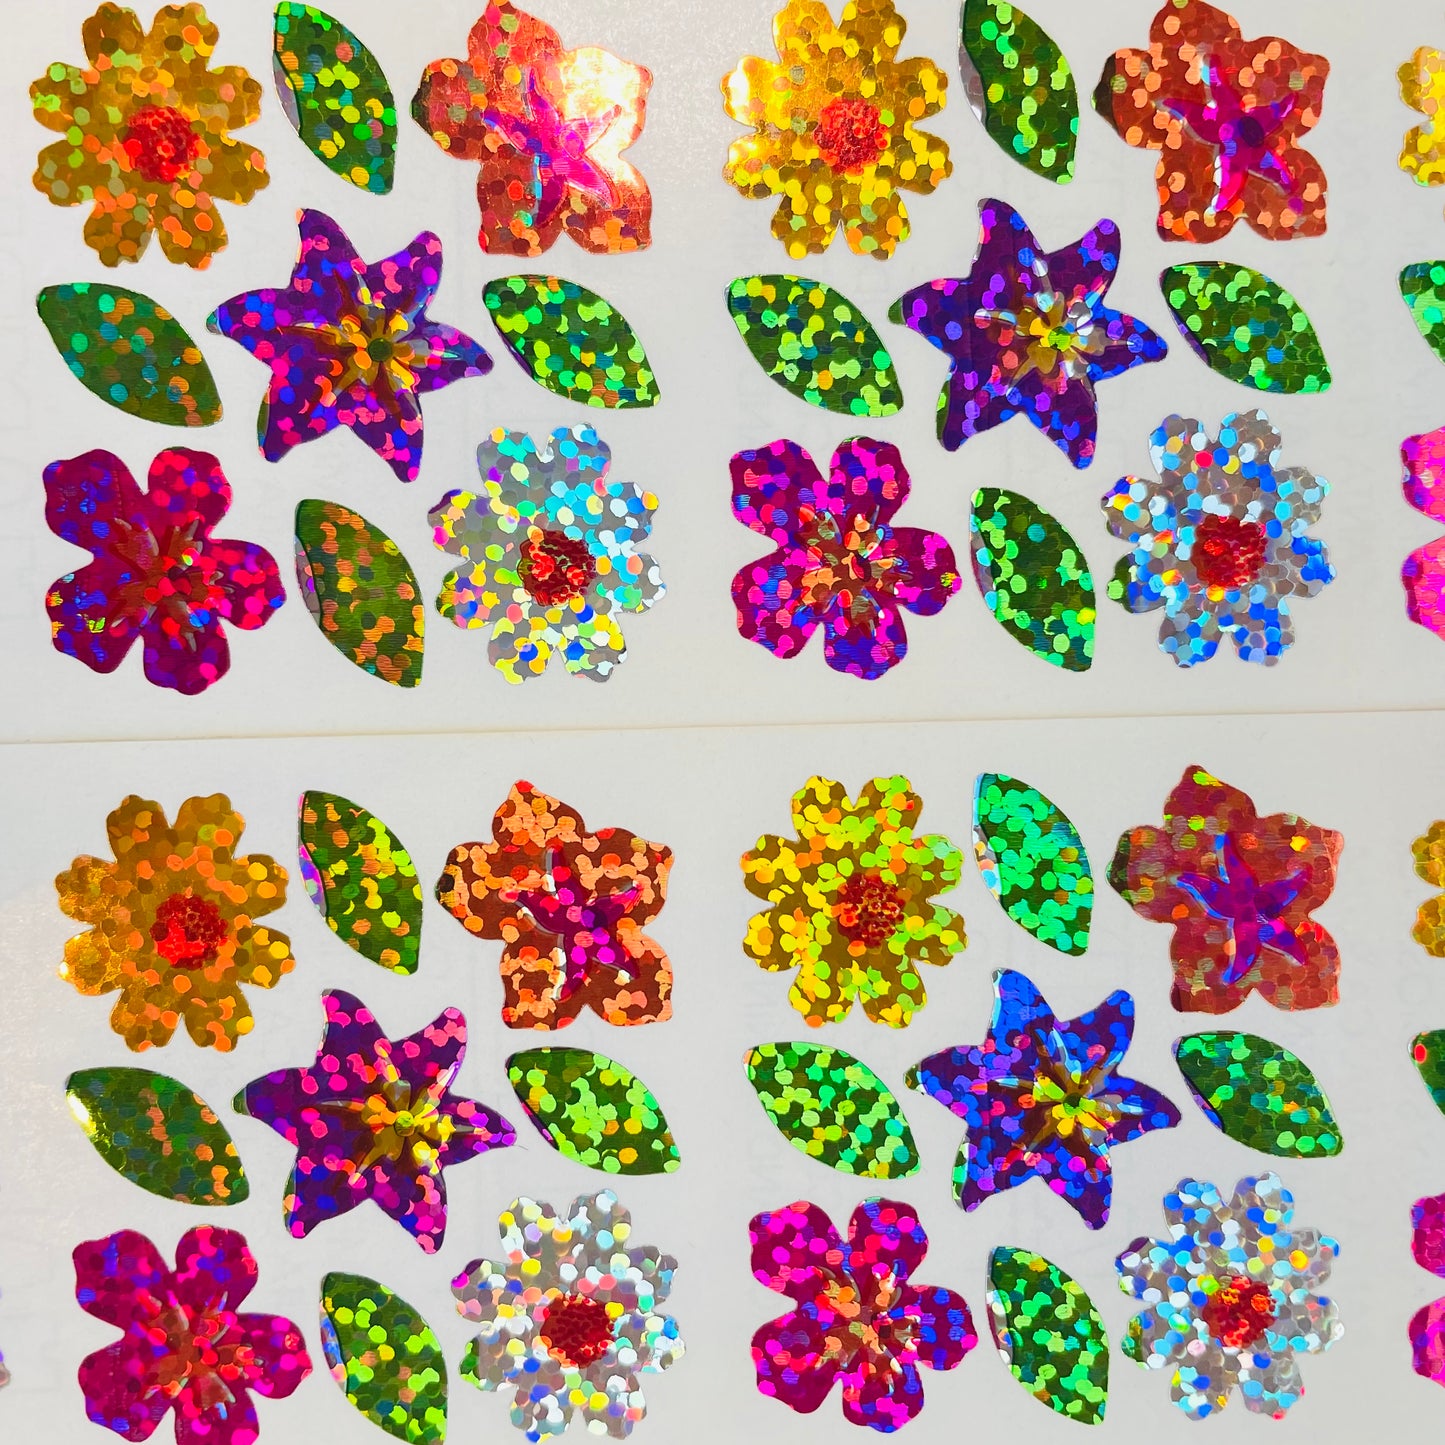 HAMBLY: Flowers with Leaves glitter stickers